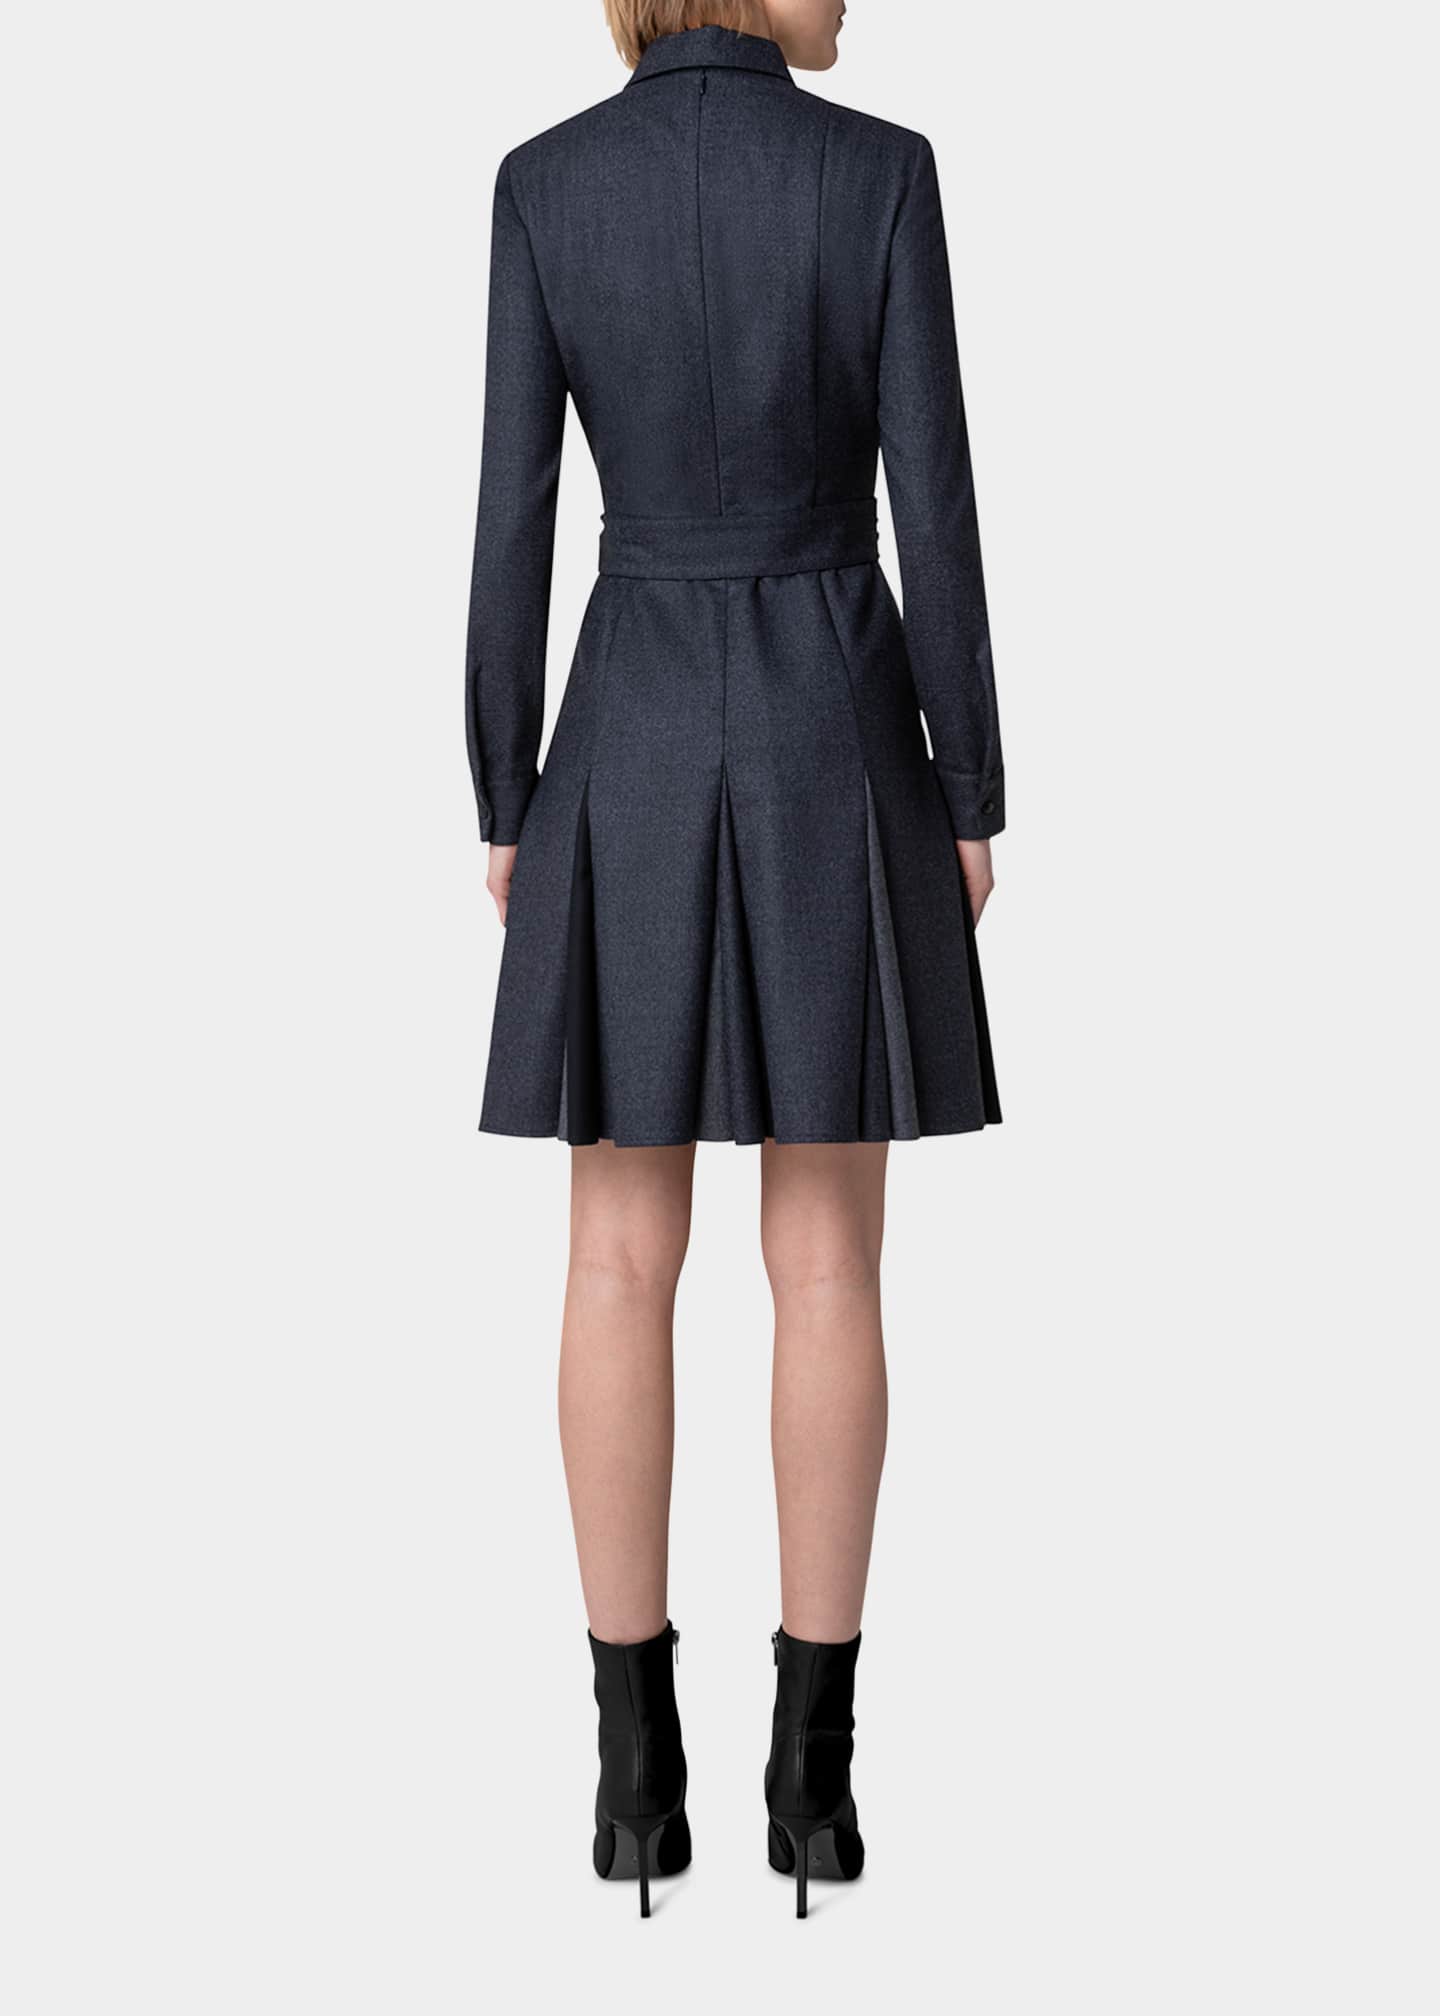 Akris punto Fit-and-Flare D-Ring Belted Wool Dress - Bergdorf Goodman